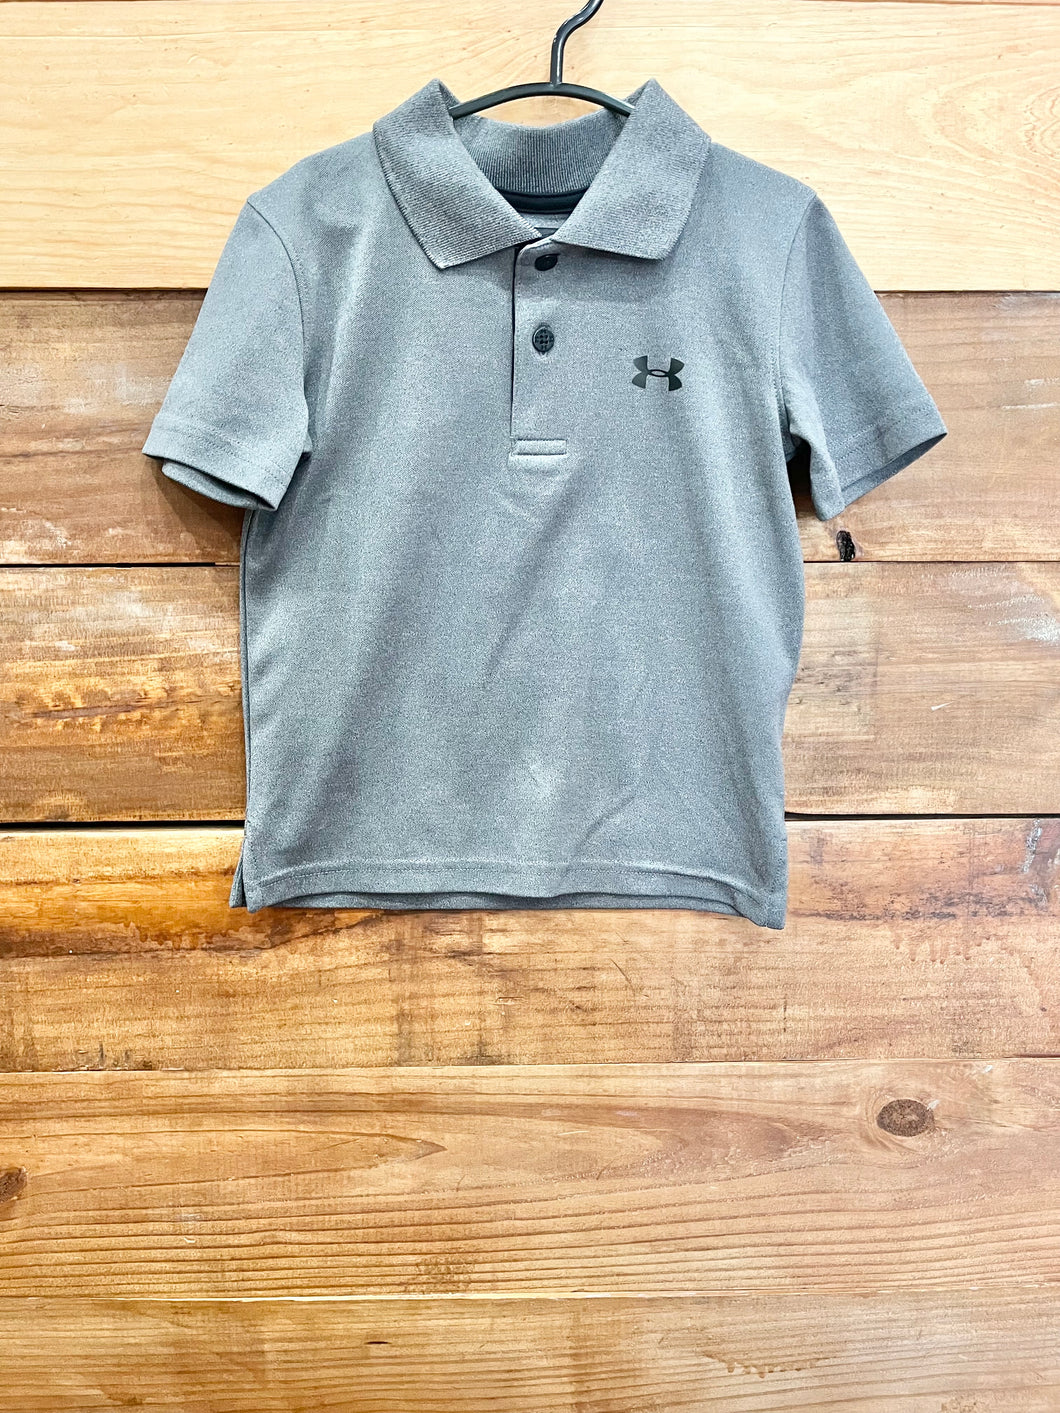 Under Armour Gray Shirt Size 3T